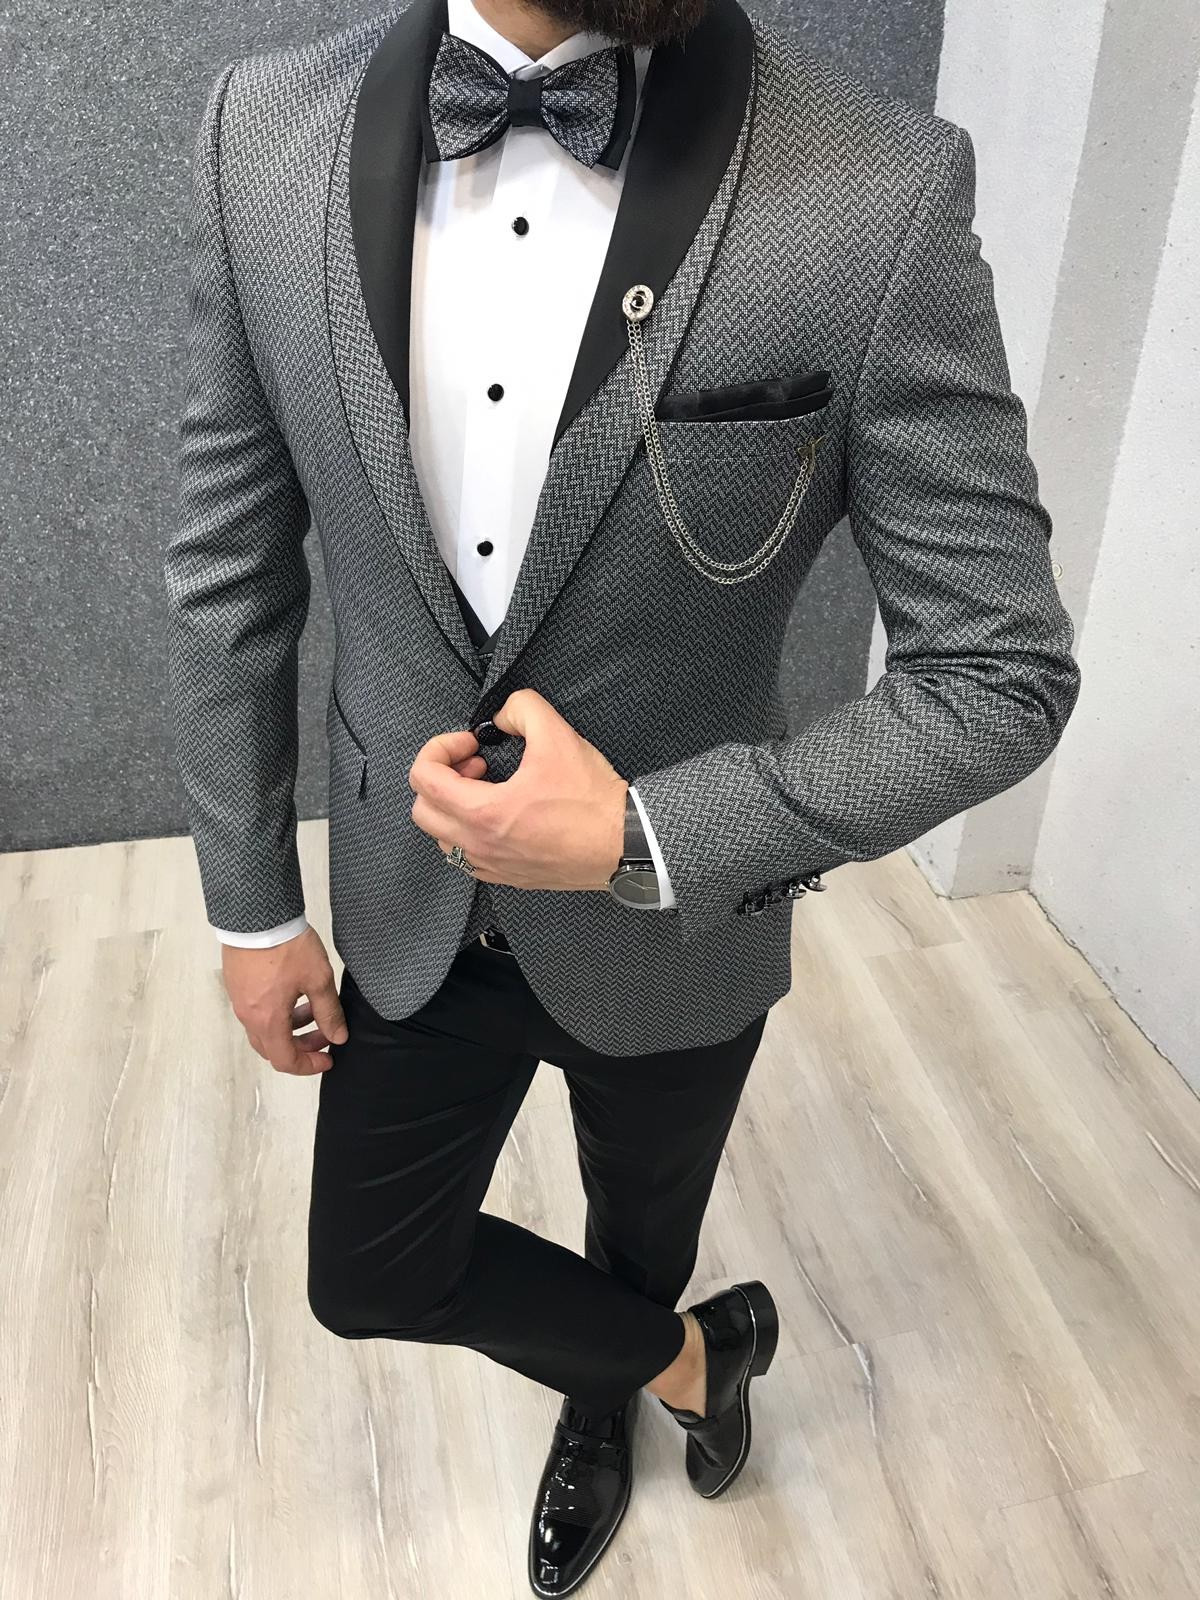 Buy Gray Slim Fit Tuxedo by Gentwith.com with Free Shipping